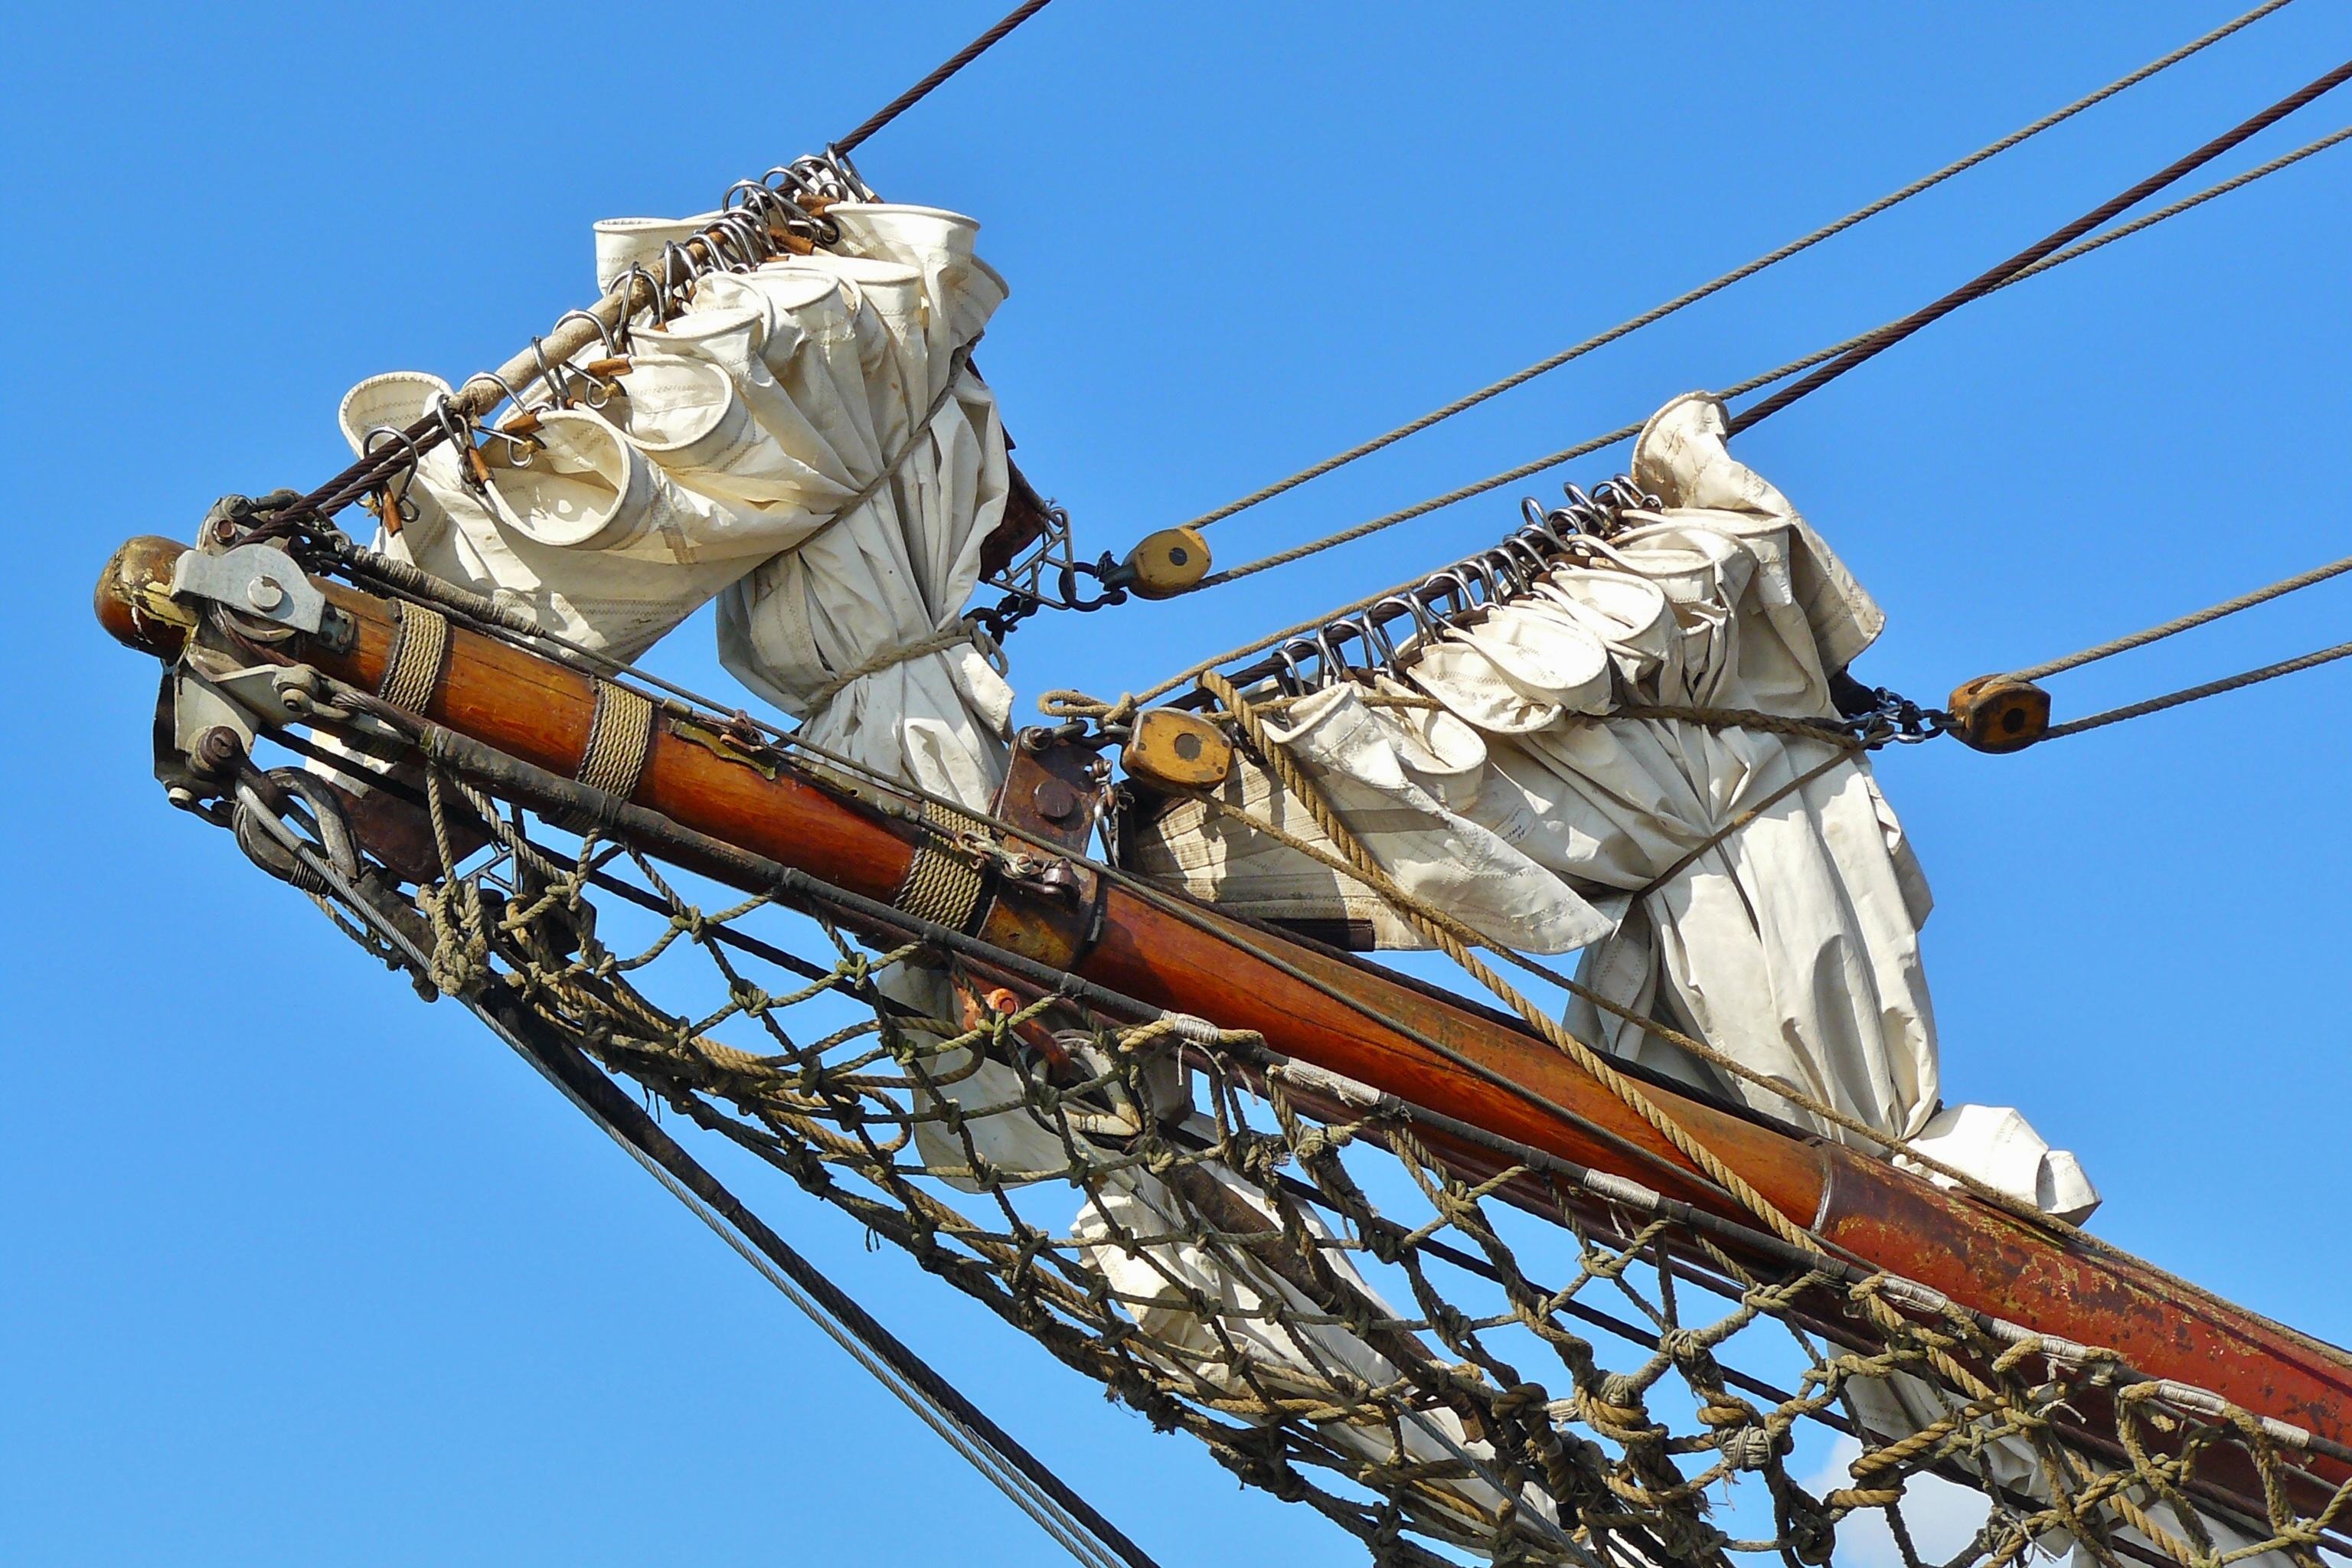 close-up photo of brown and white ship bow at day time, sailing vessel